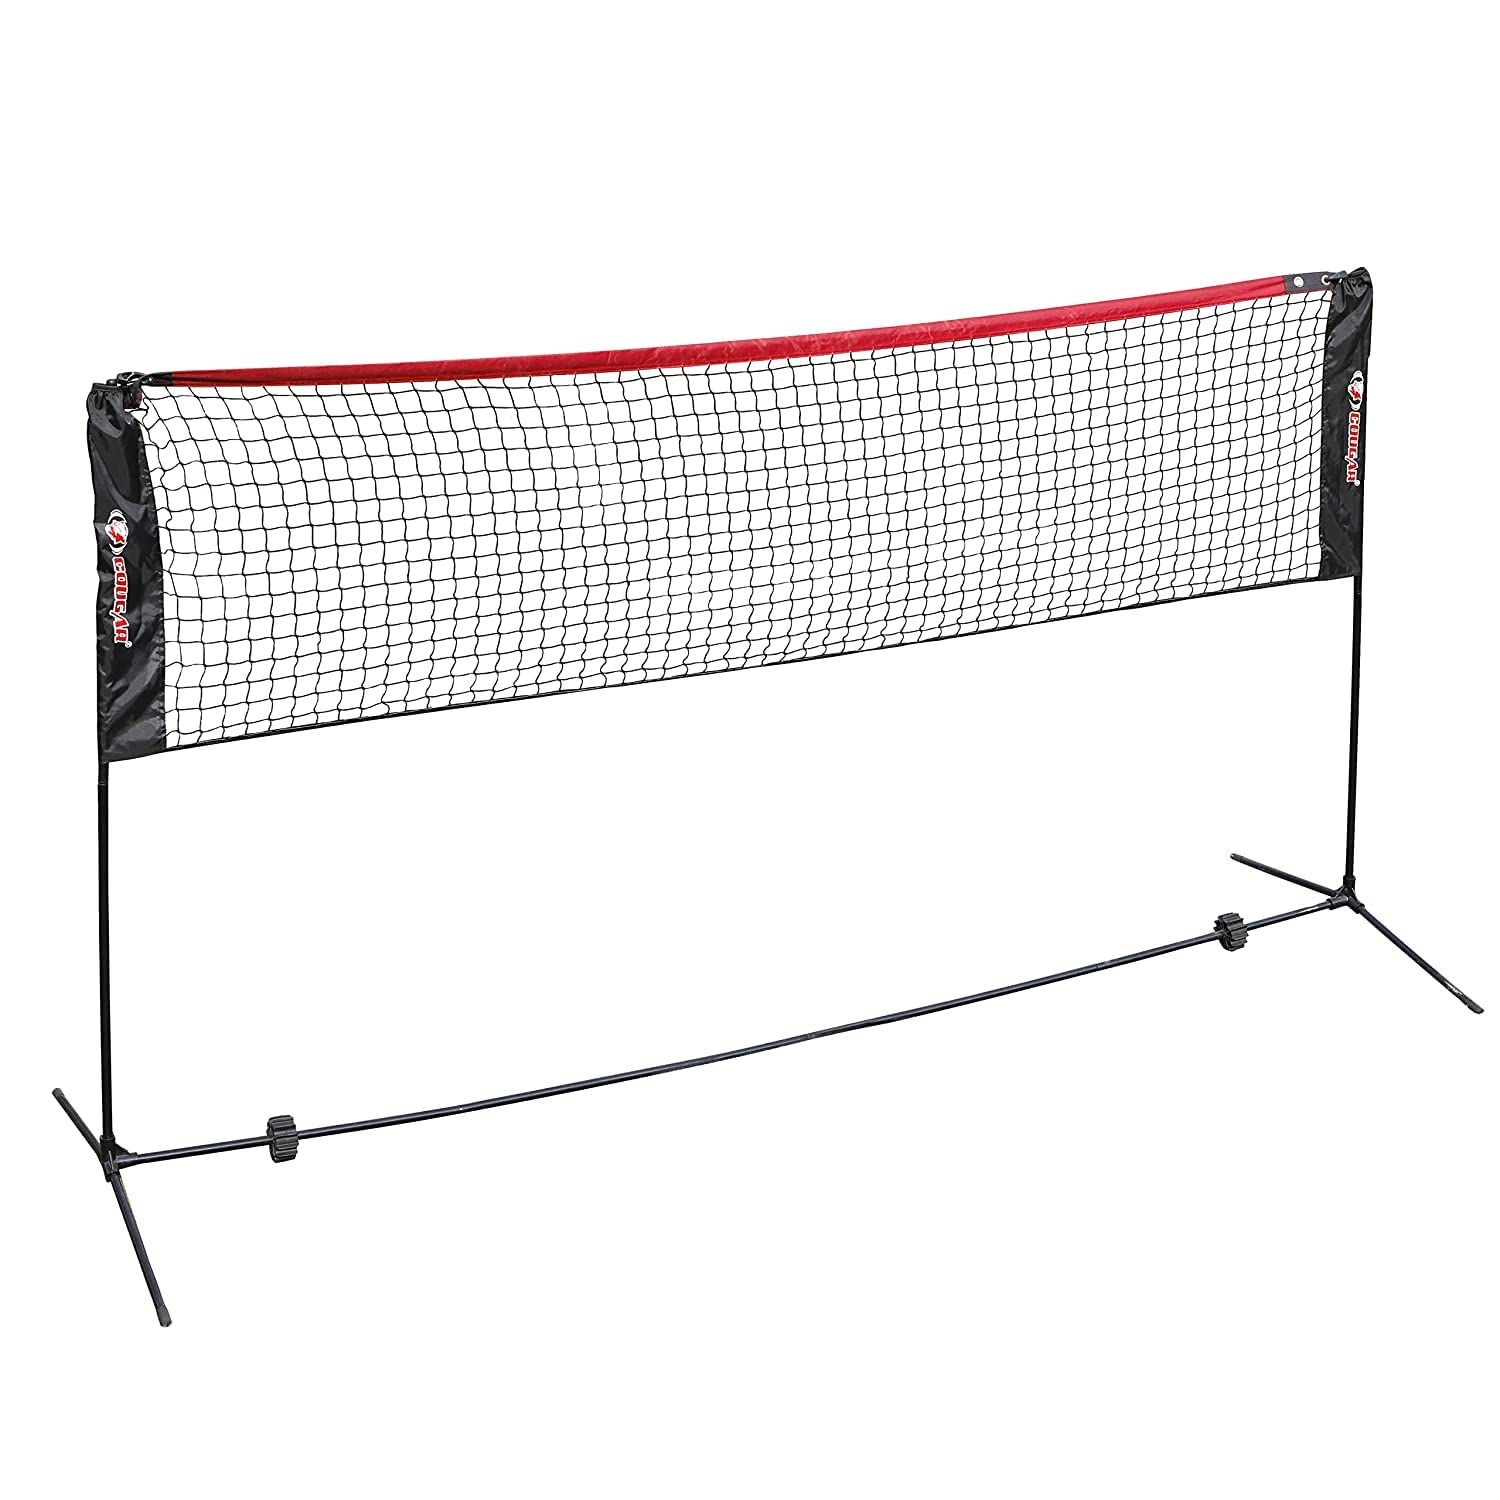 Cougar Outdoor Badminton Kids Net Set with Foldable Stand Poles and Ca